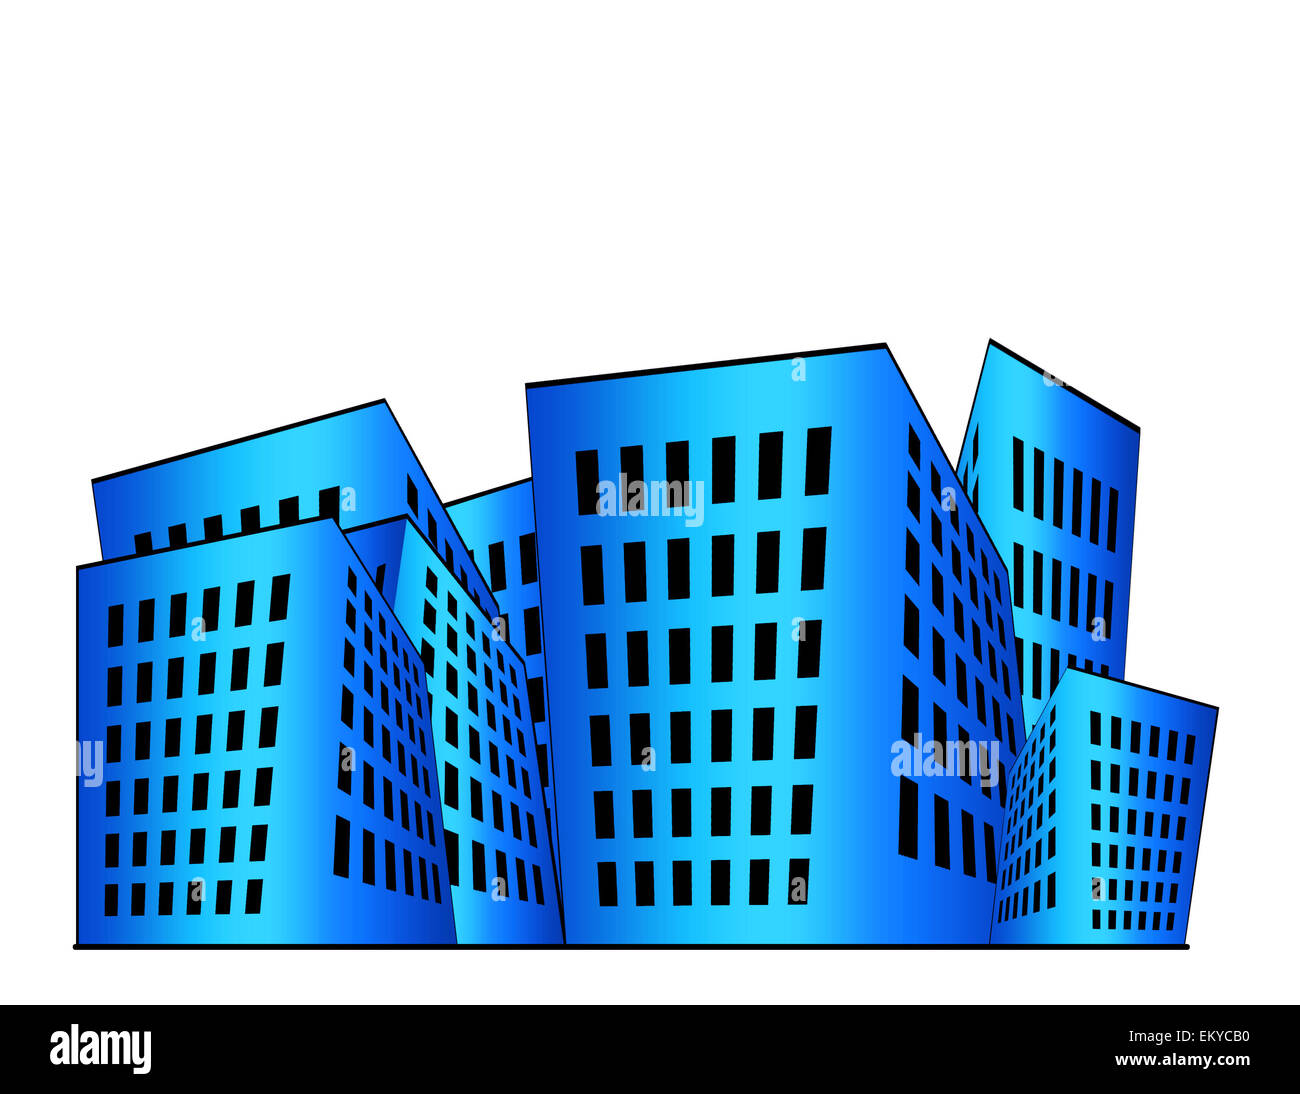 Building illustration in blue gradient with white space. Stock Photo